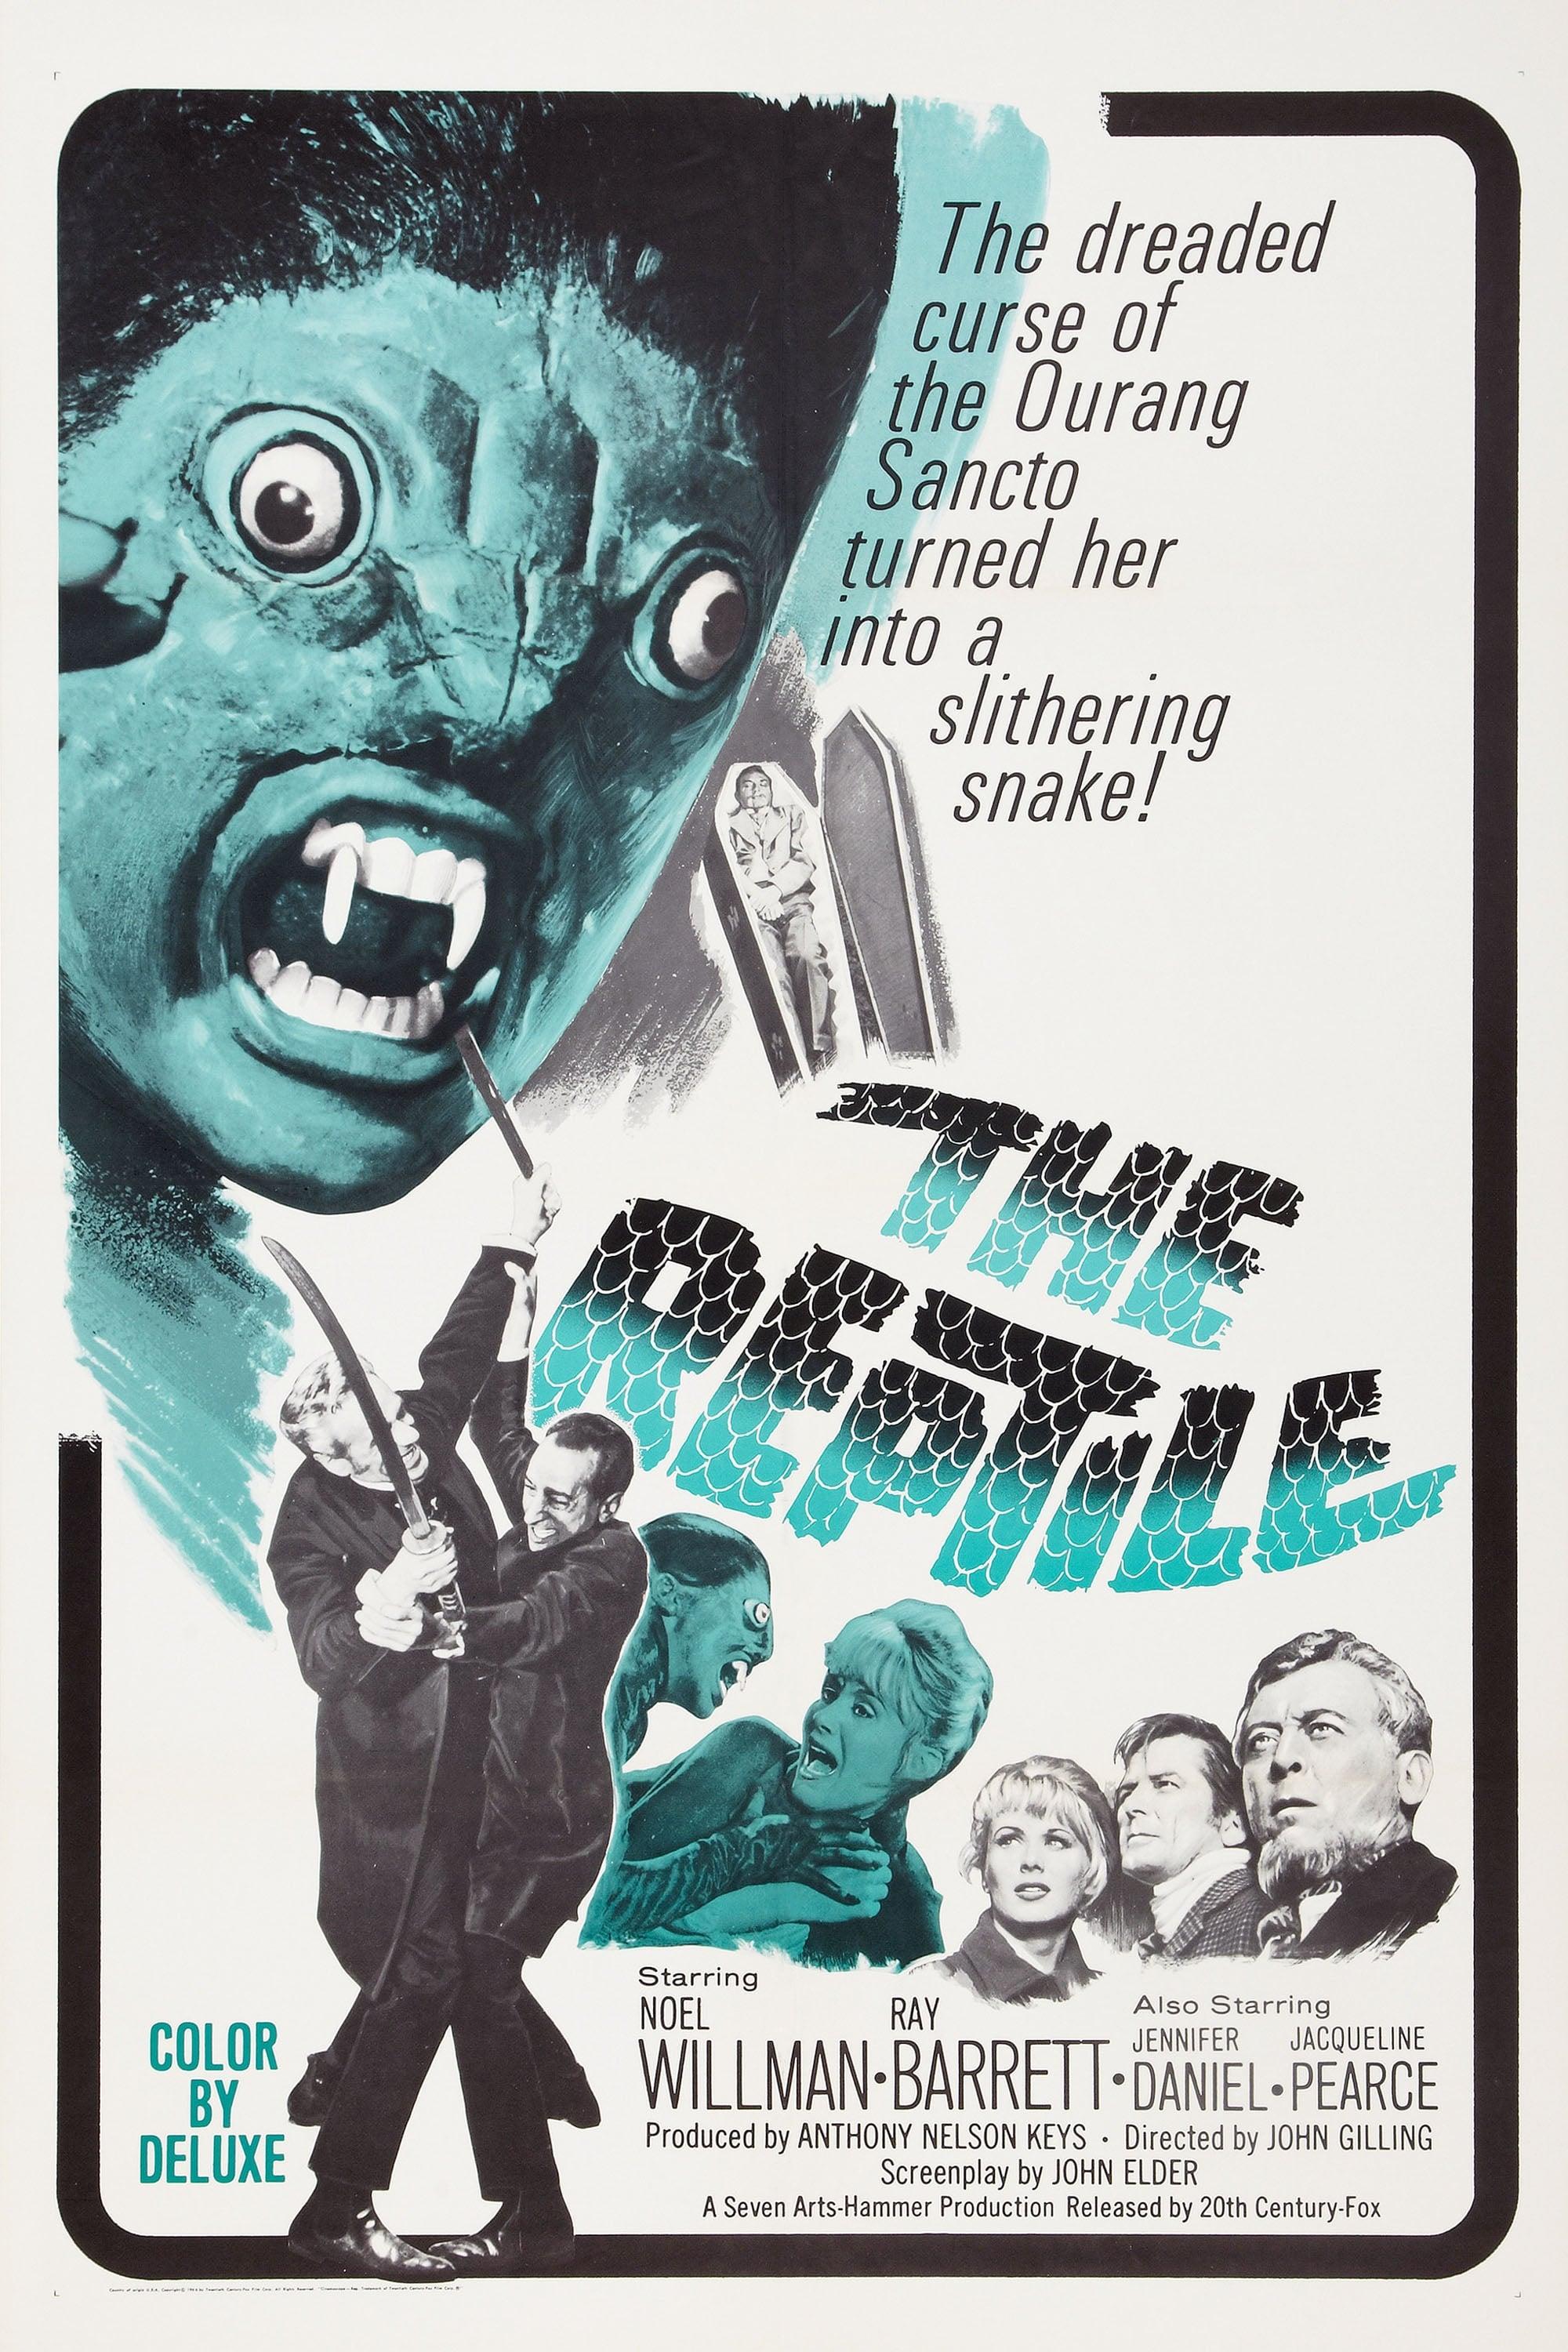 The Reptile poster